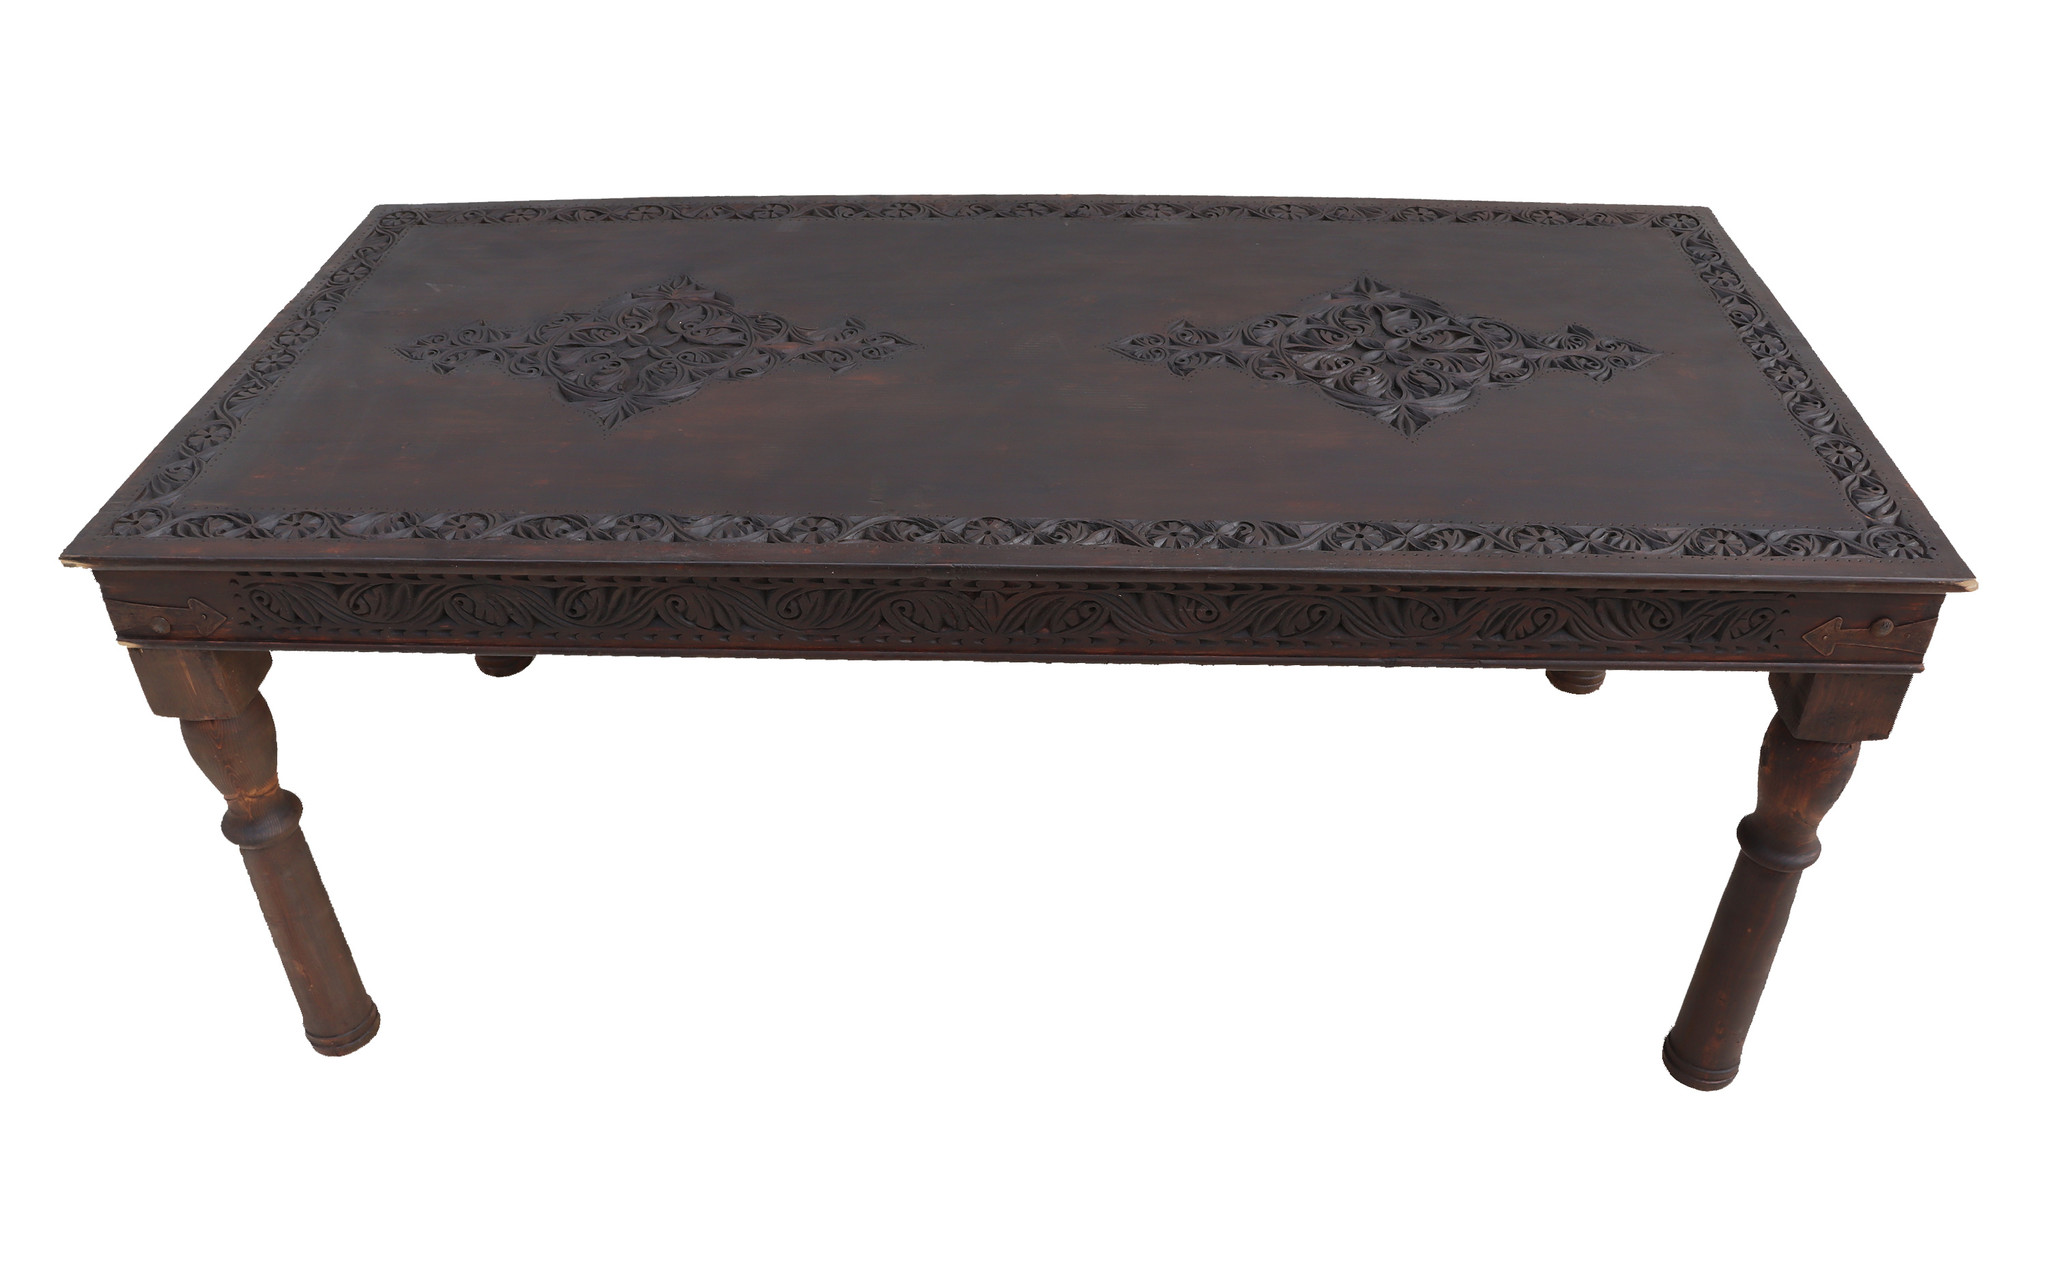 190x90  cm solid wood hand-carved table dining table from Afghanistan nuristan